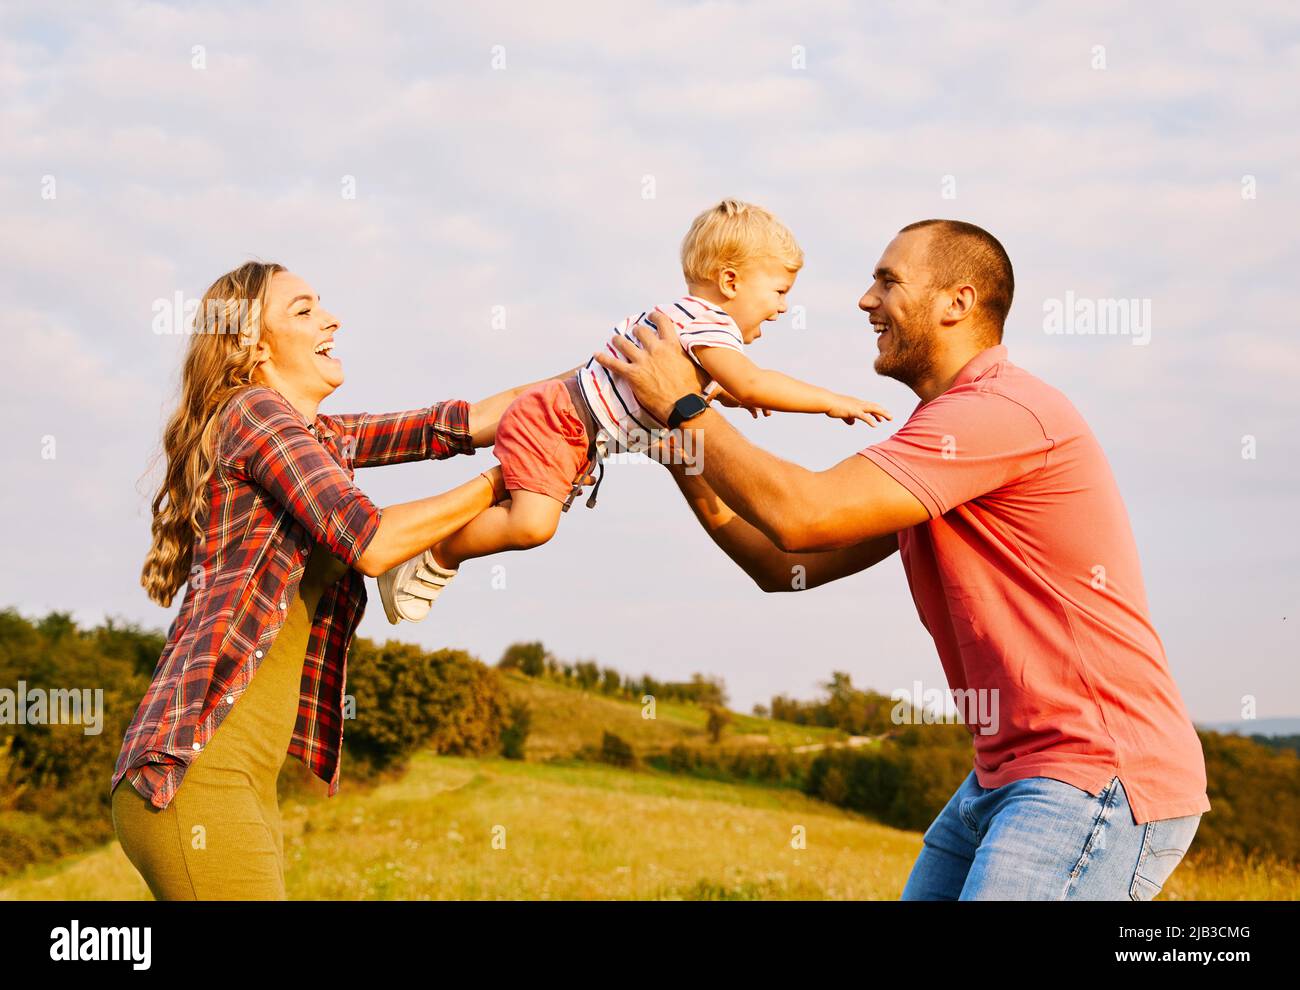 Portrait of a young happy family having fun outdoors Stock Photo